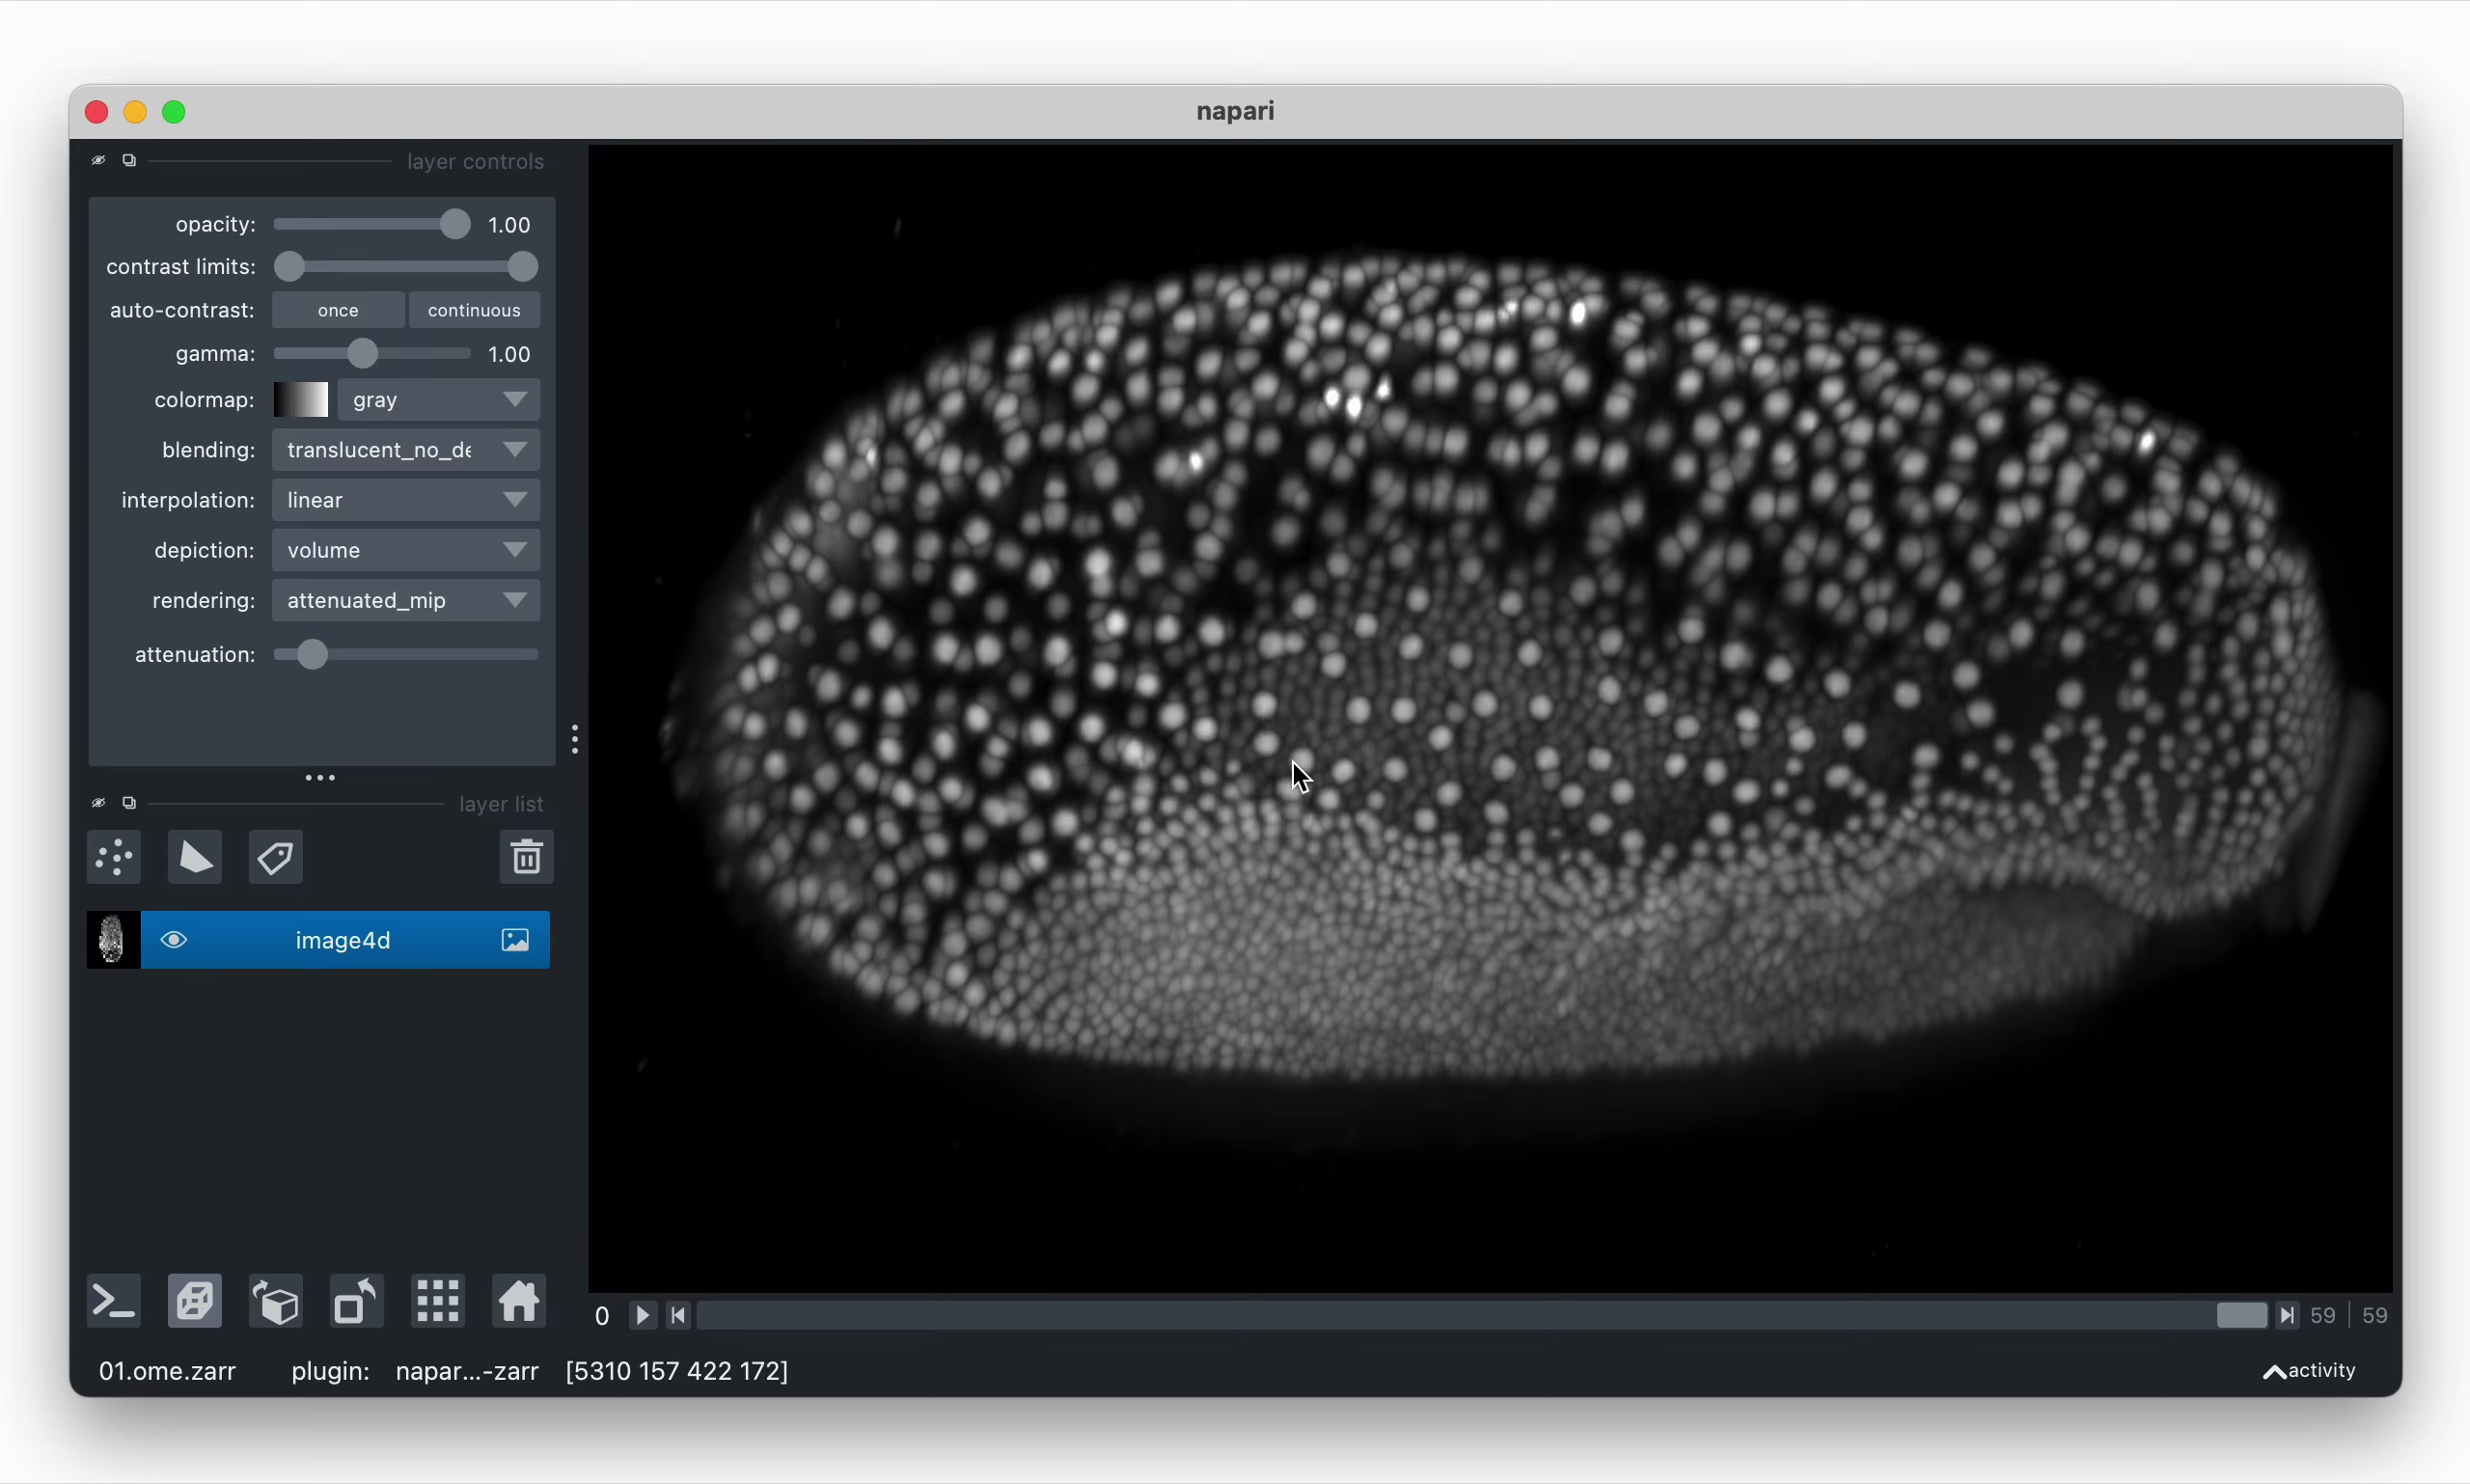 napari viewer showing a 4D image of a developing Tribolium embryo.  Dataset Fluo-N3DL-TRIF from the [cell tracking challenge](http://celltrackingchallenge.net/3d-datasets/) by Dr. A. Jain, MPI-CBG, Dresden, Germany.